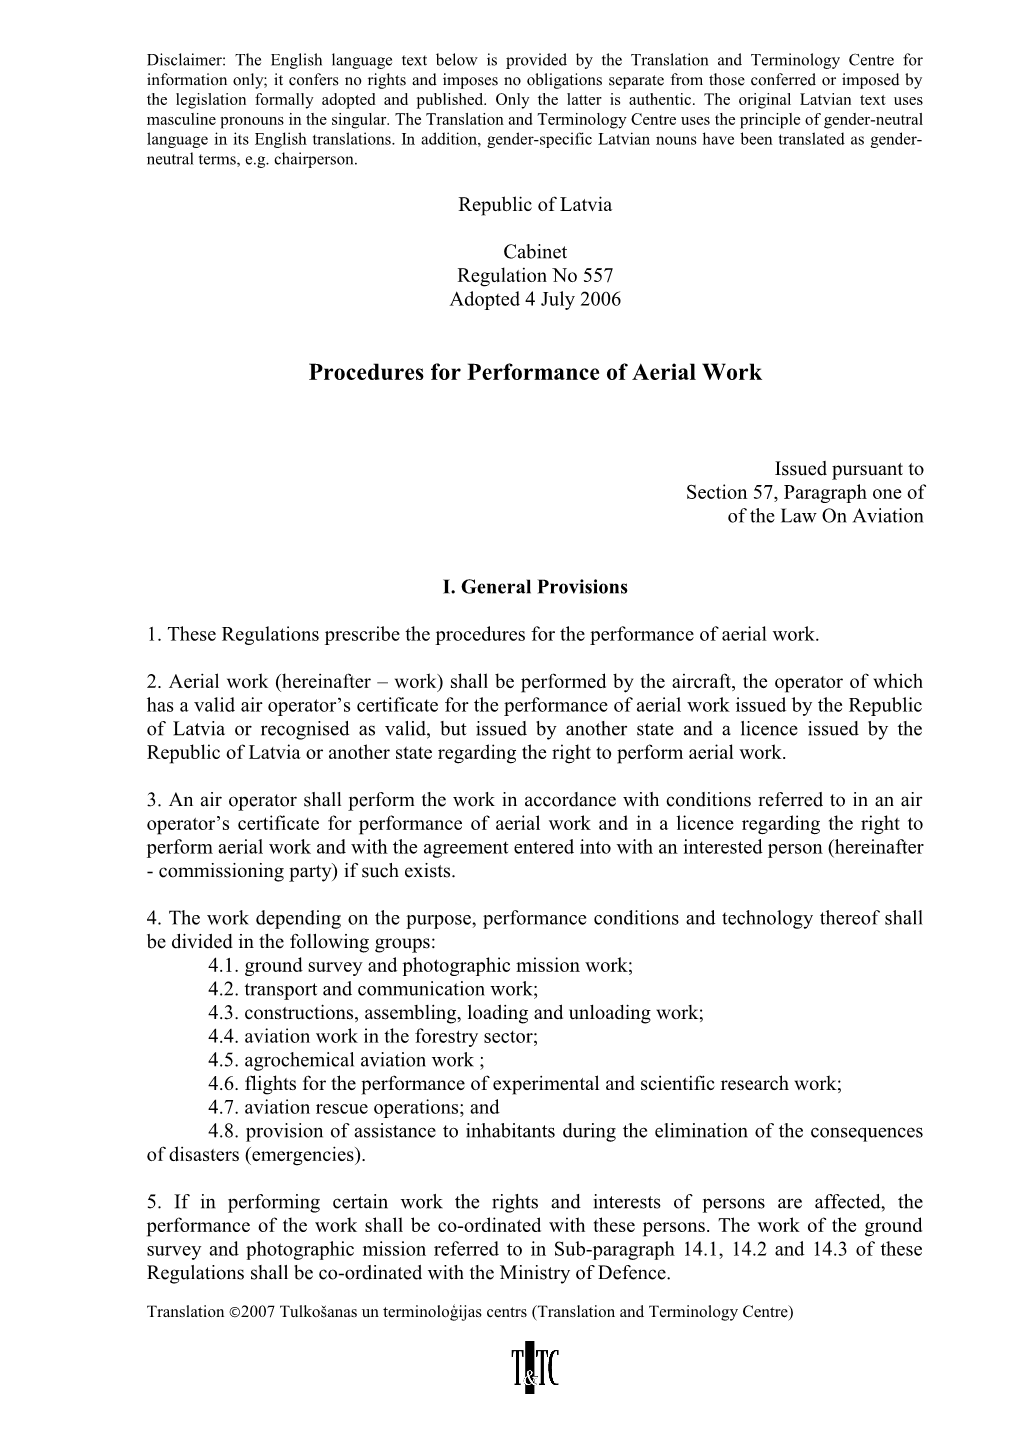 Procedures for Performance of Aerial Work